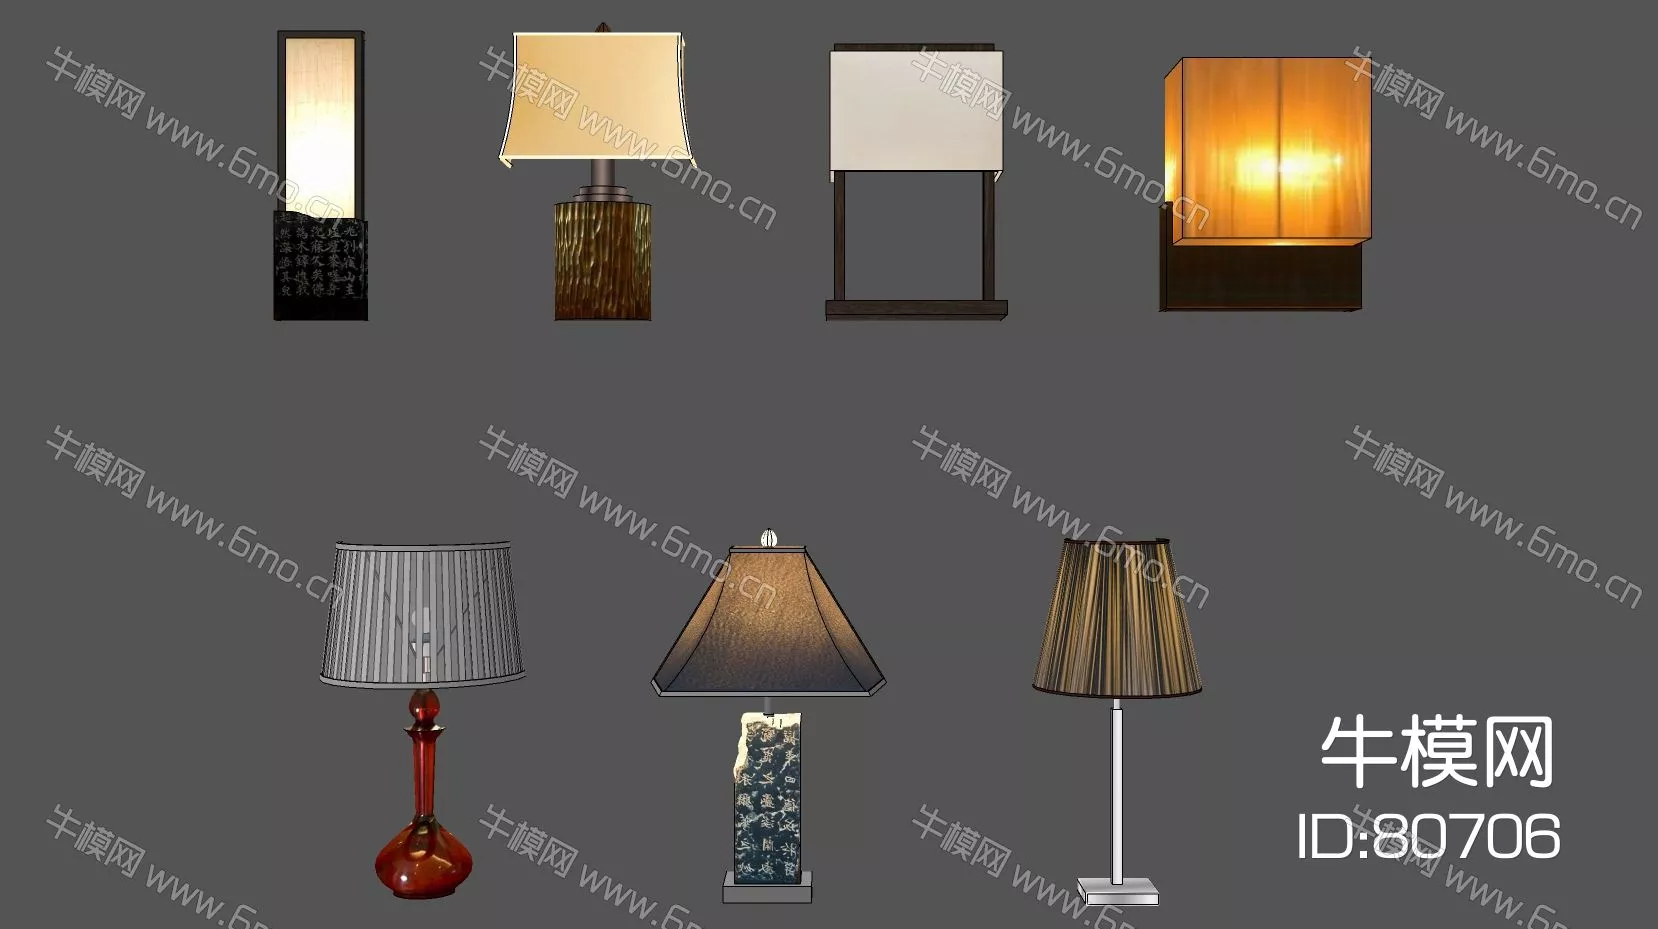 CHINESE TABLE LAMP - SKETCHUP 3D MODEL - ENSCAPE - 80706